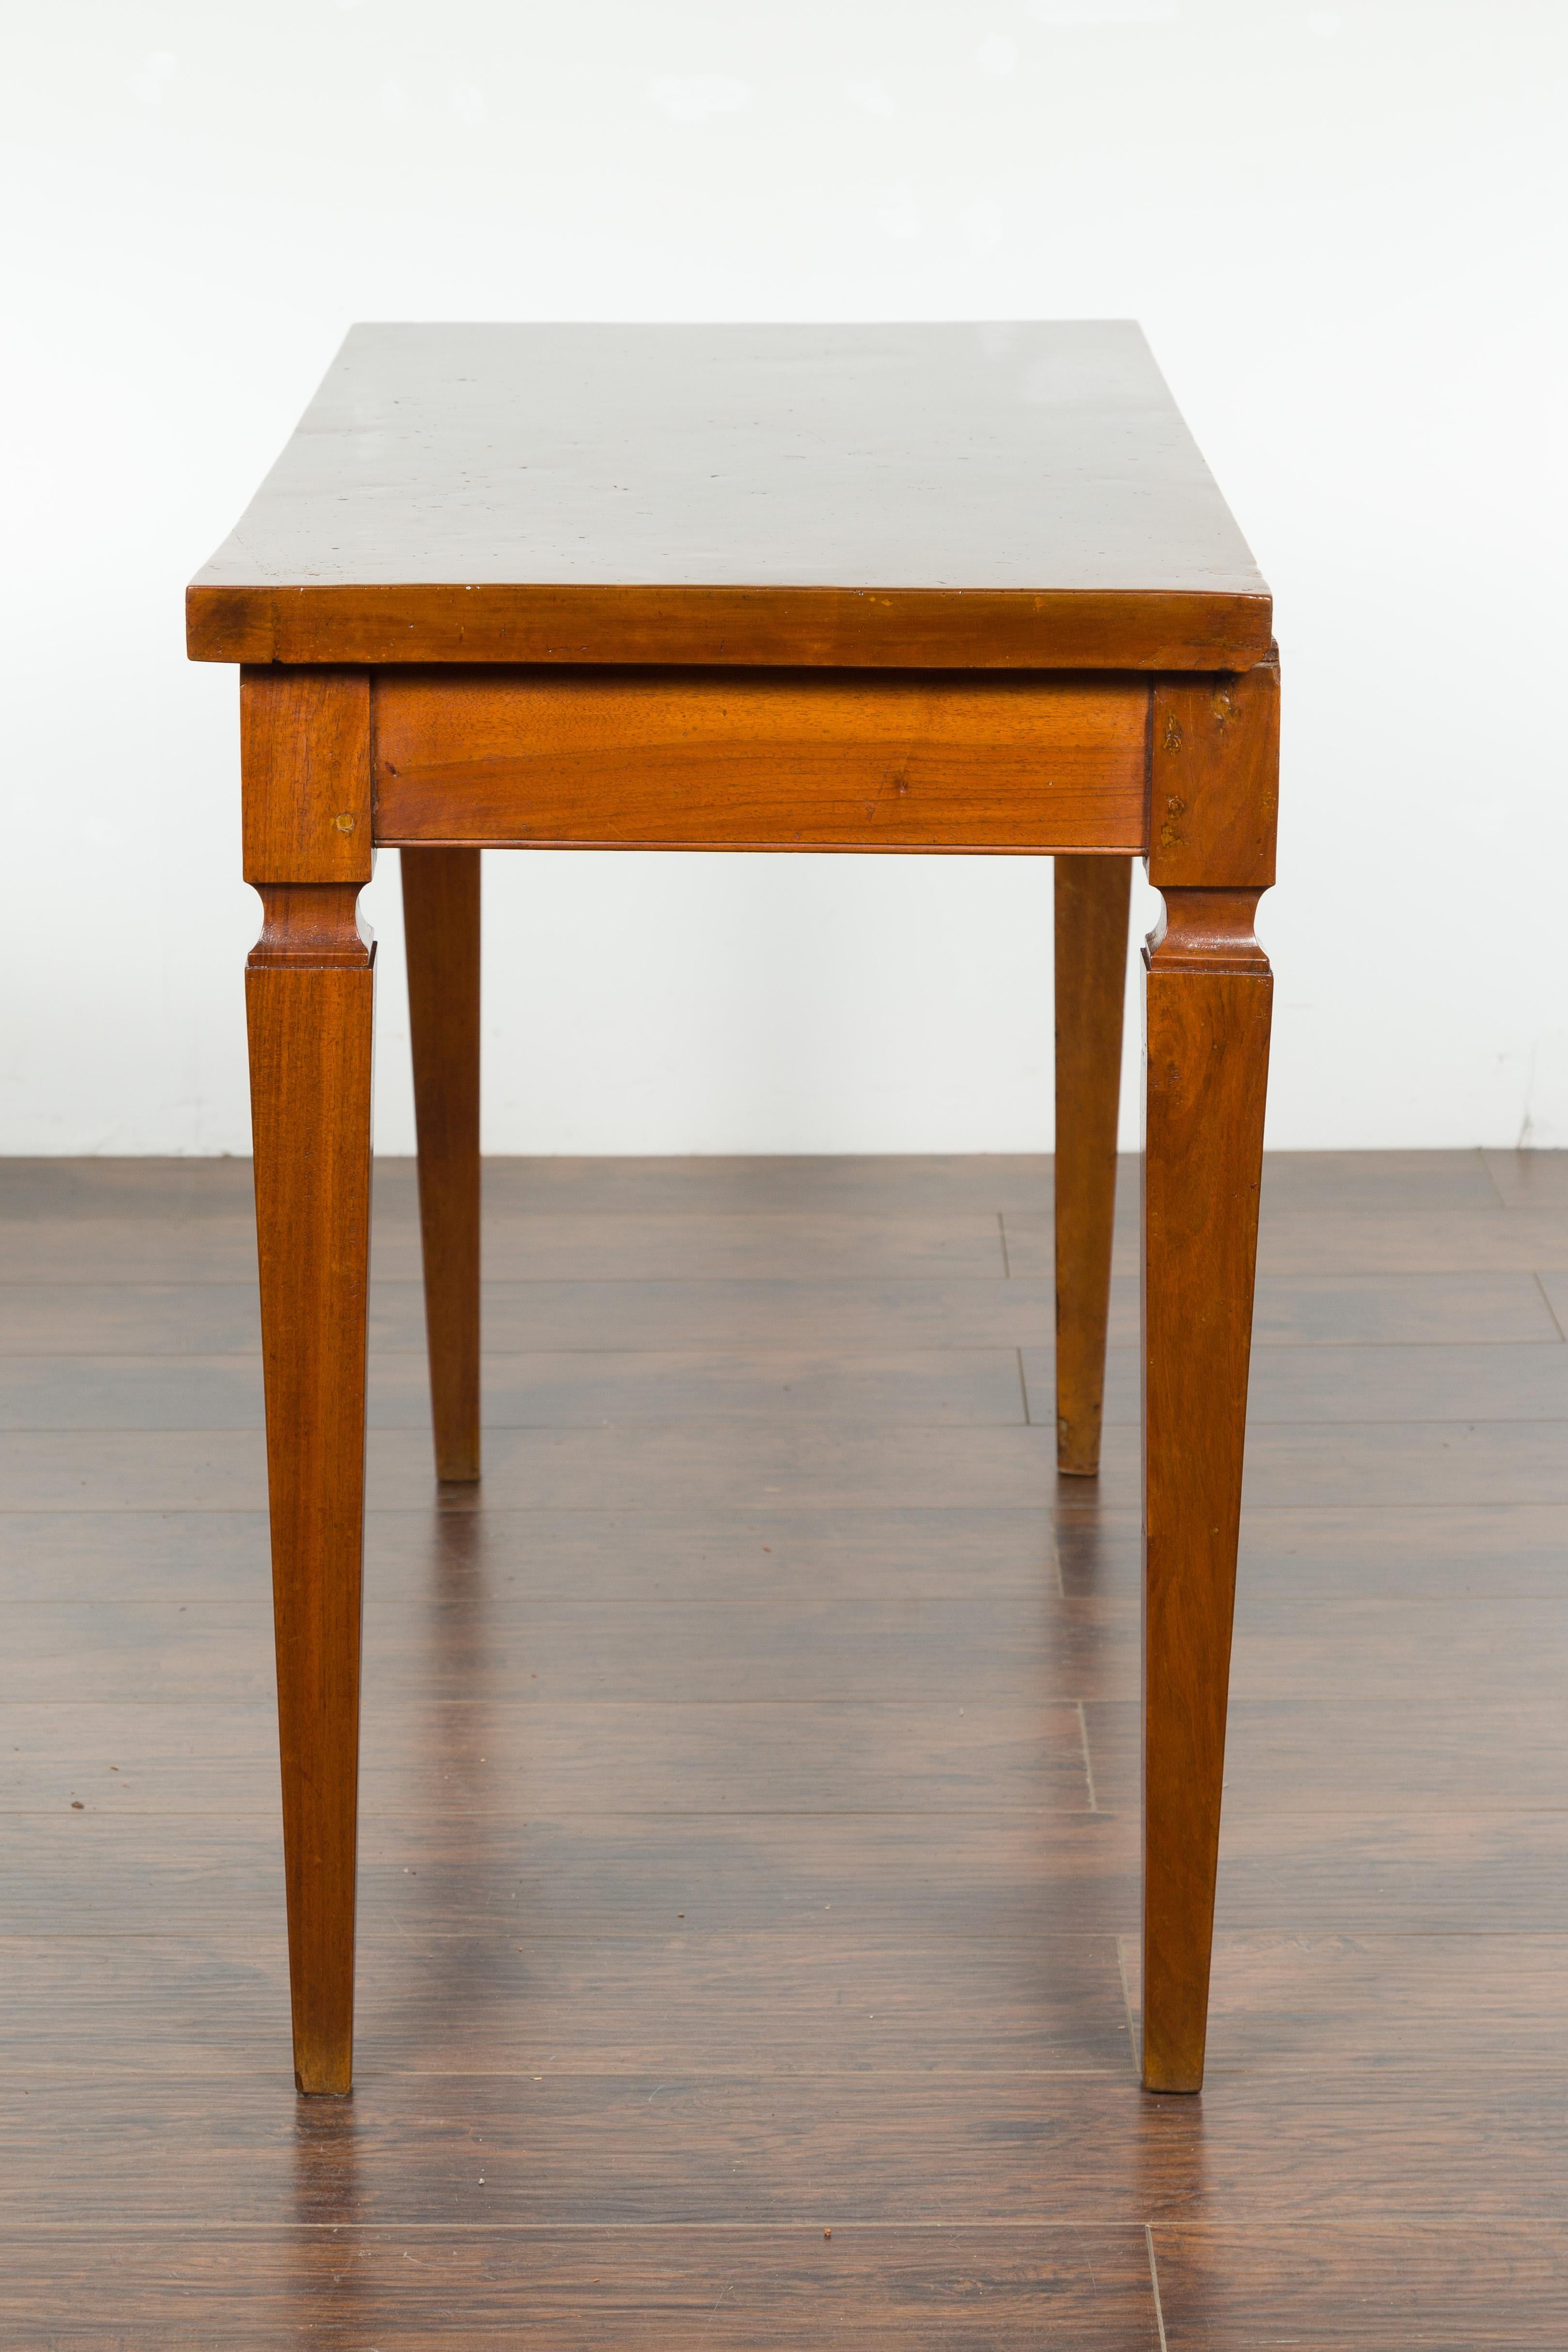 Italian 19th Century Walnut Desk with Single Drawer and Tapered Legs For Sale 10